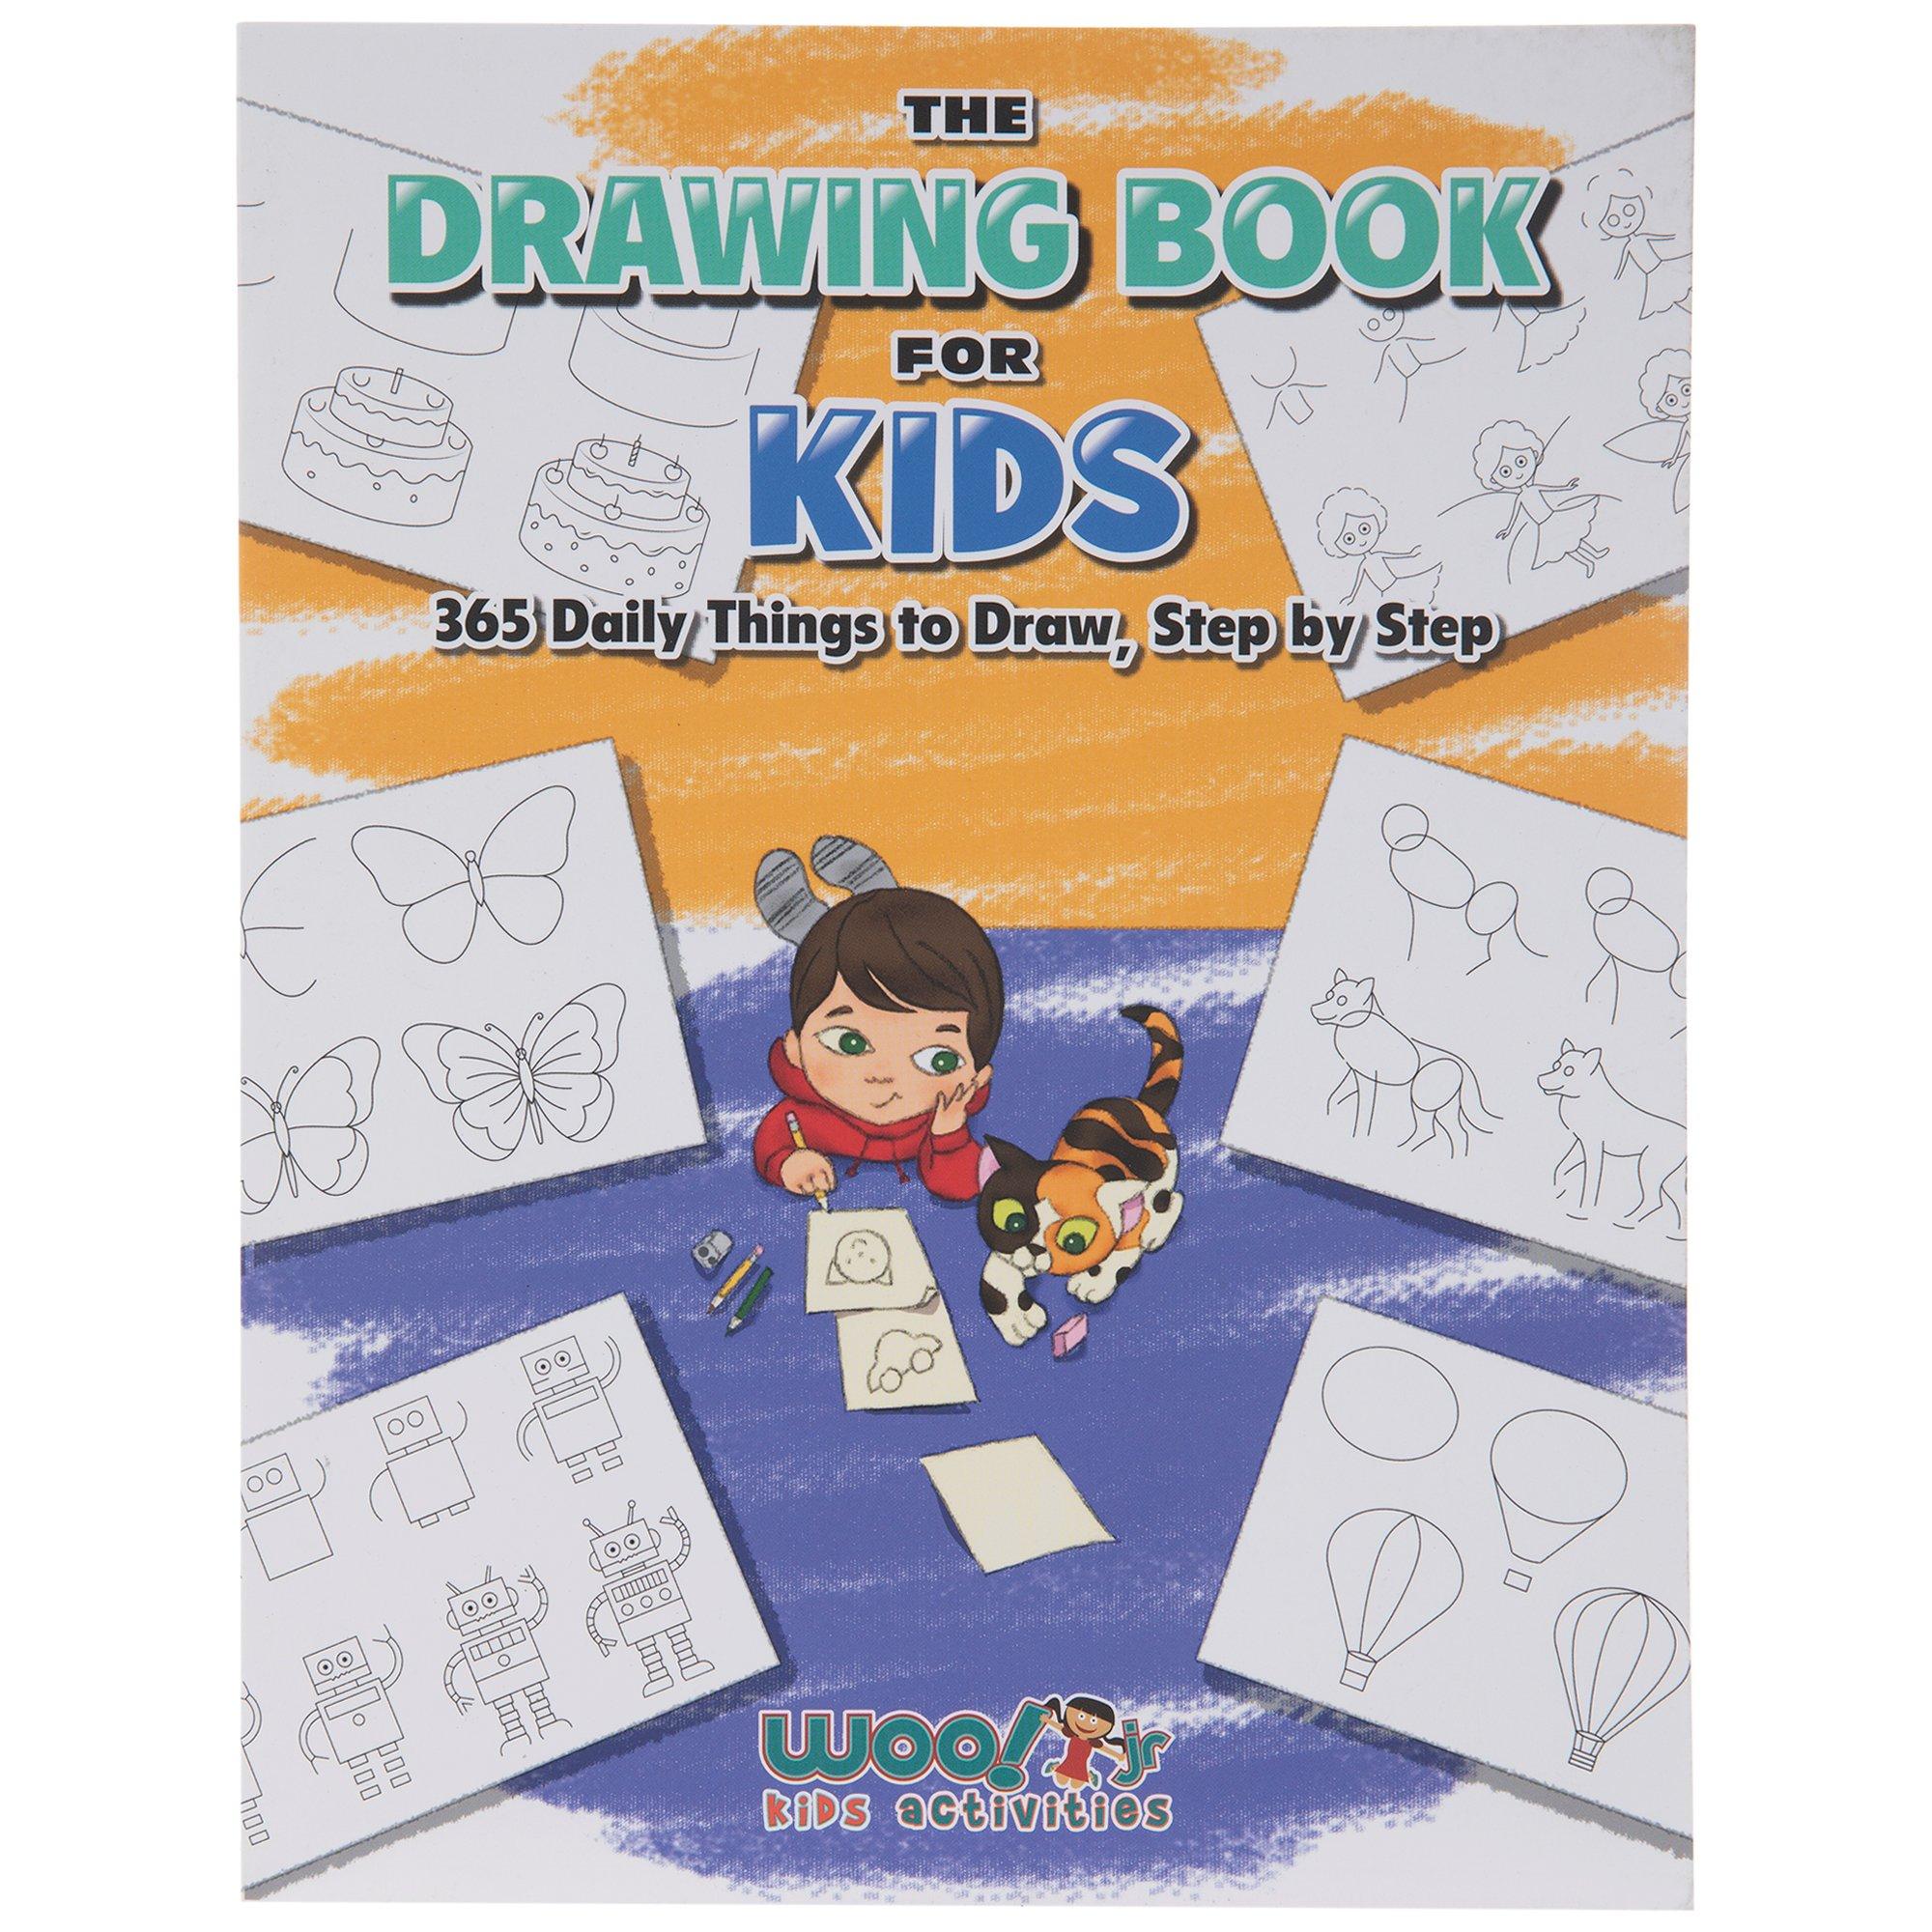 The Drawing Book For Kids